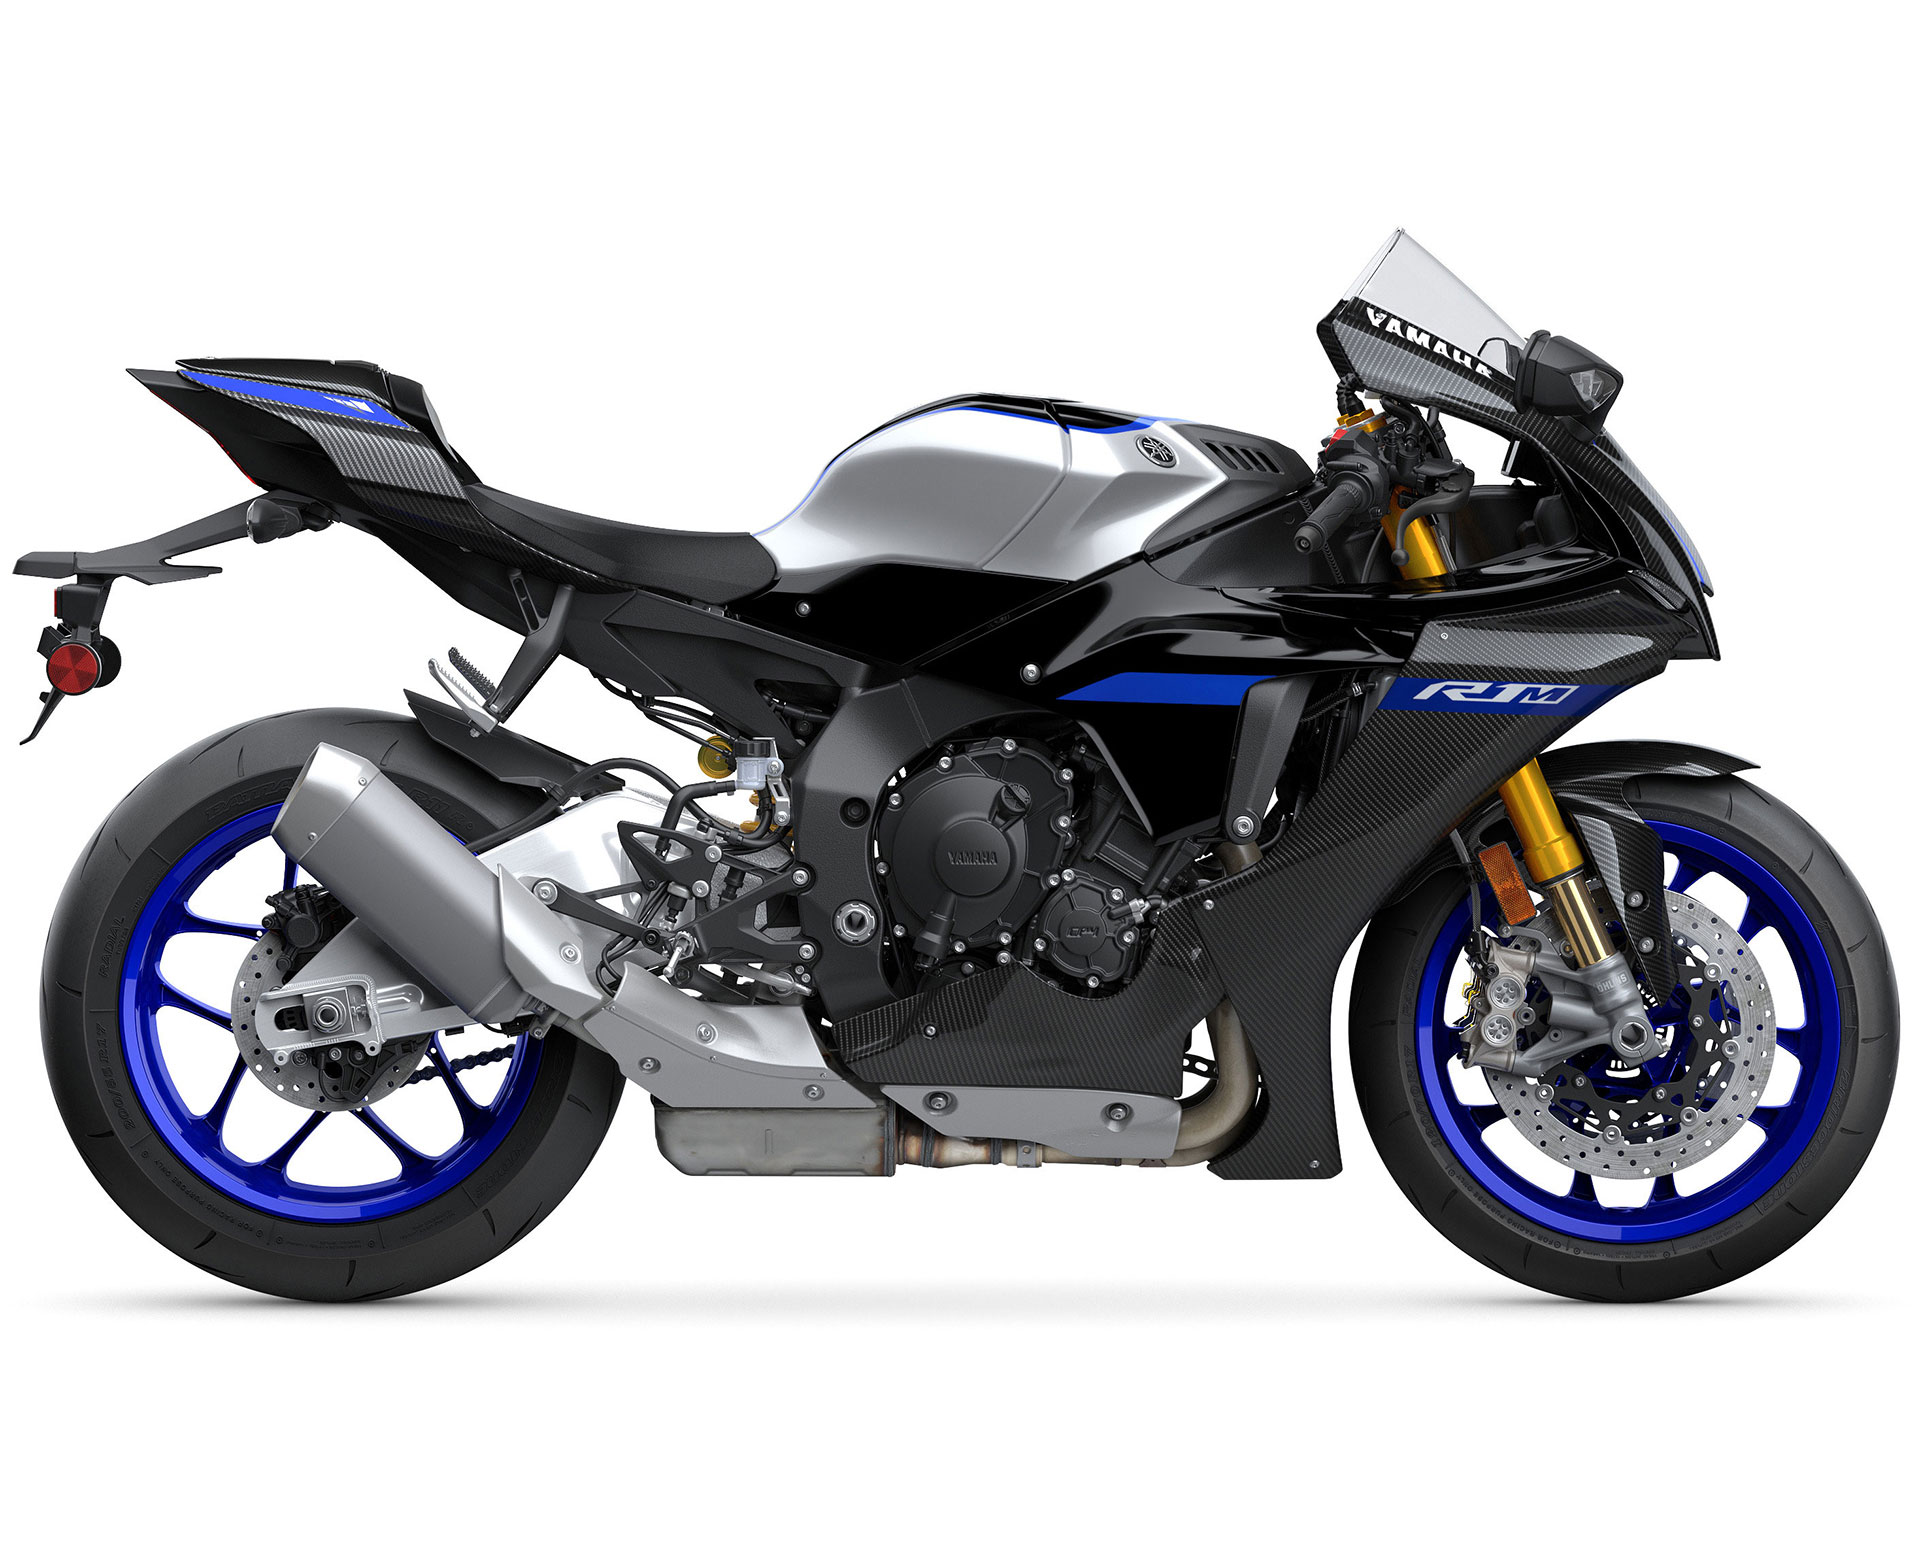 Thumbnail of your customized YZF-R1M 2023